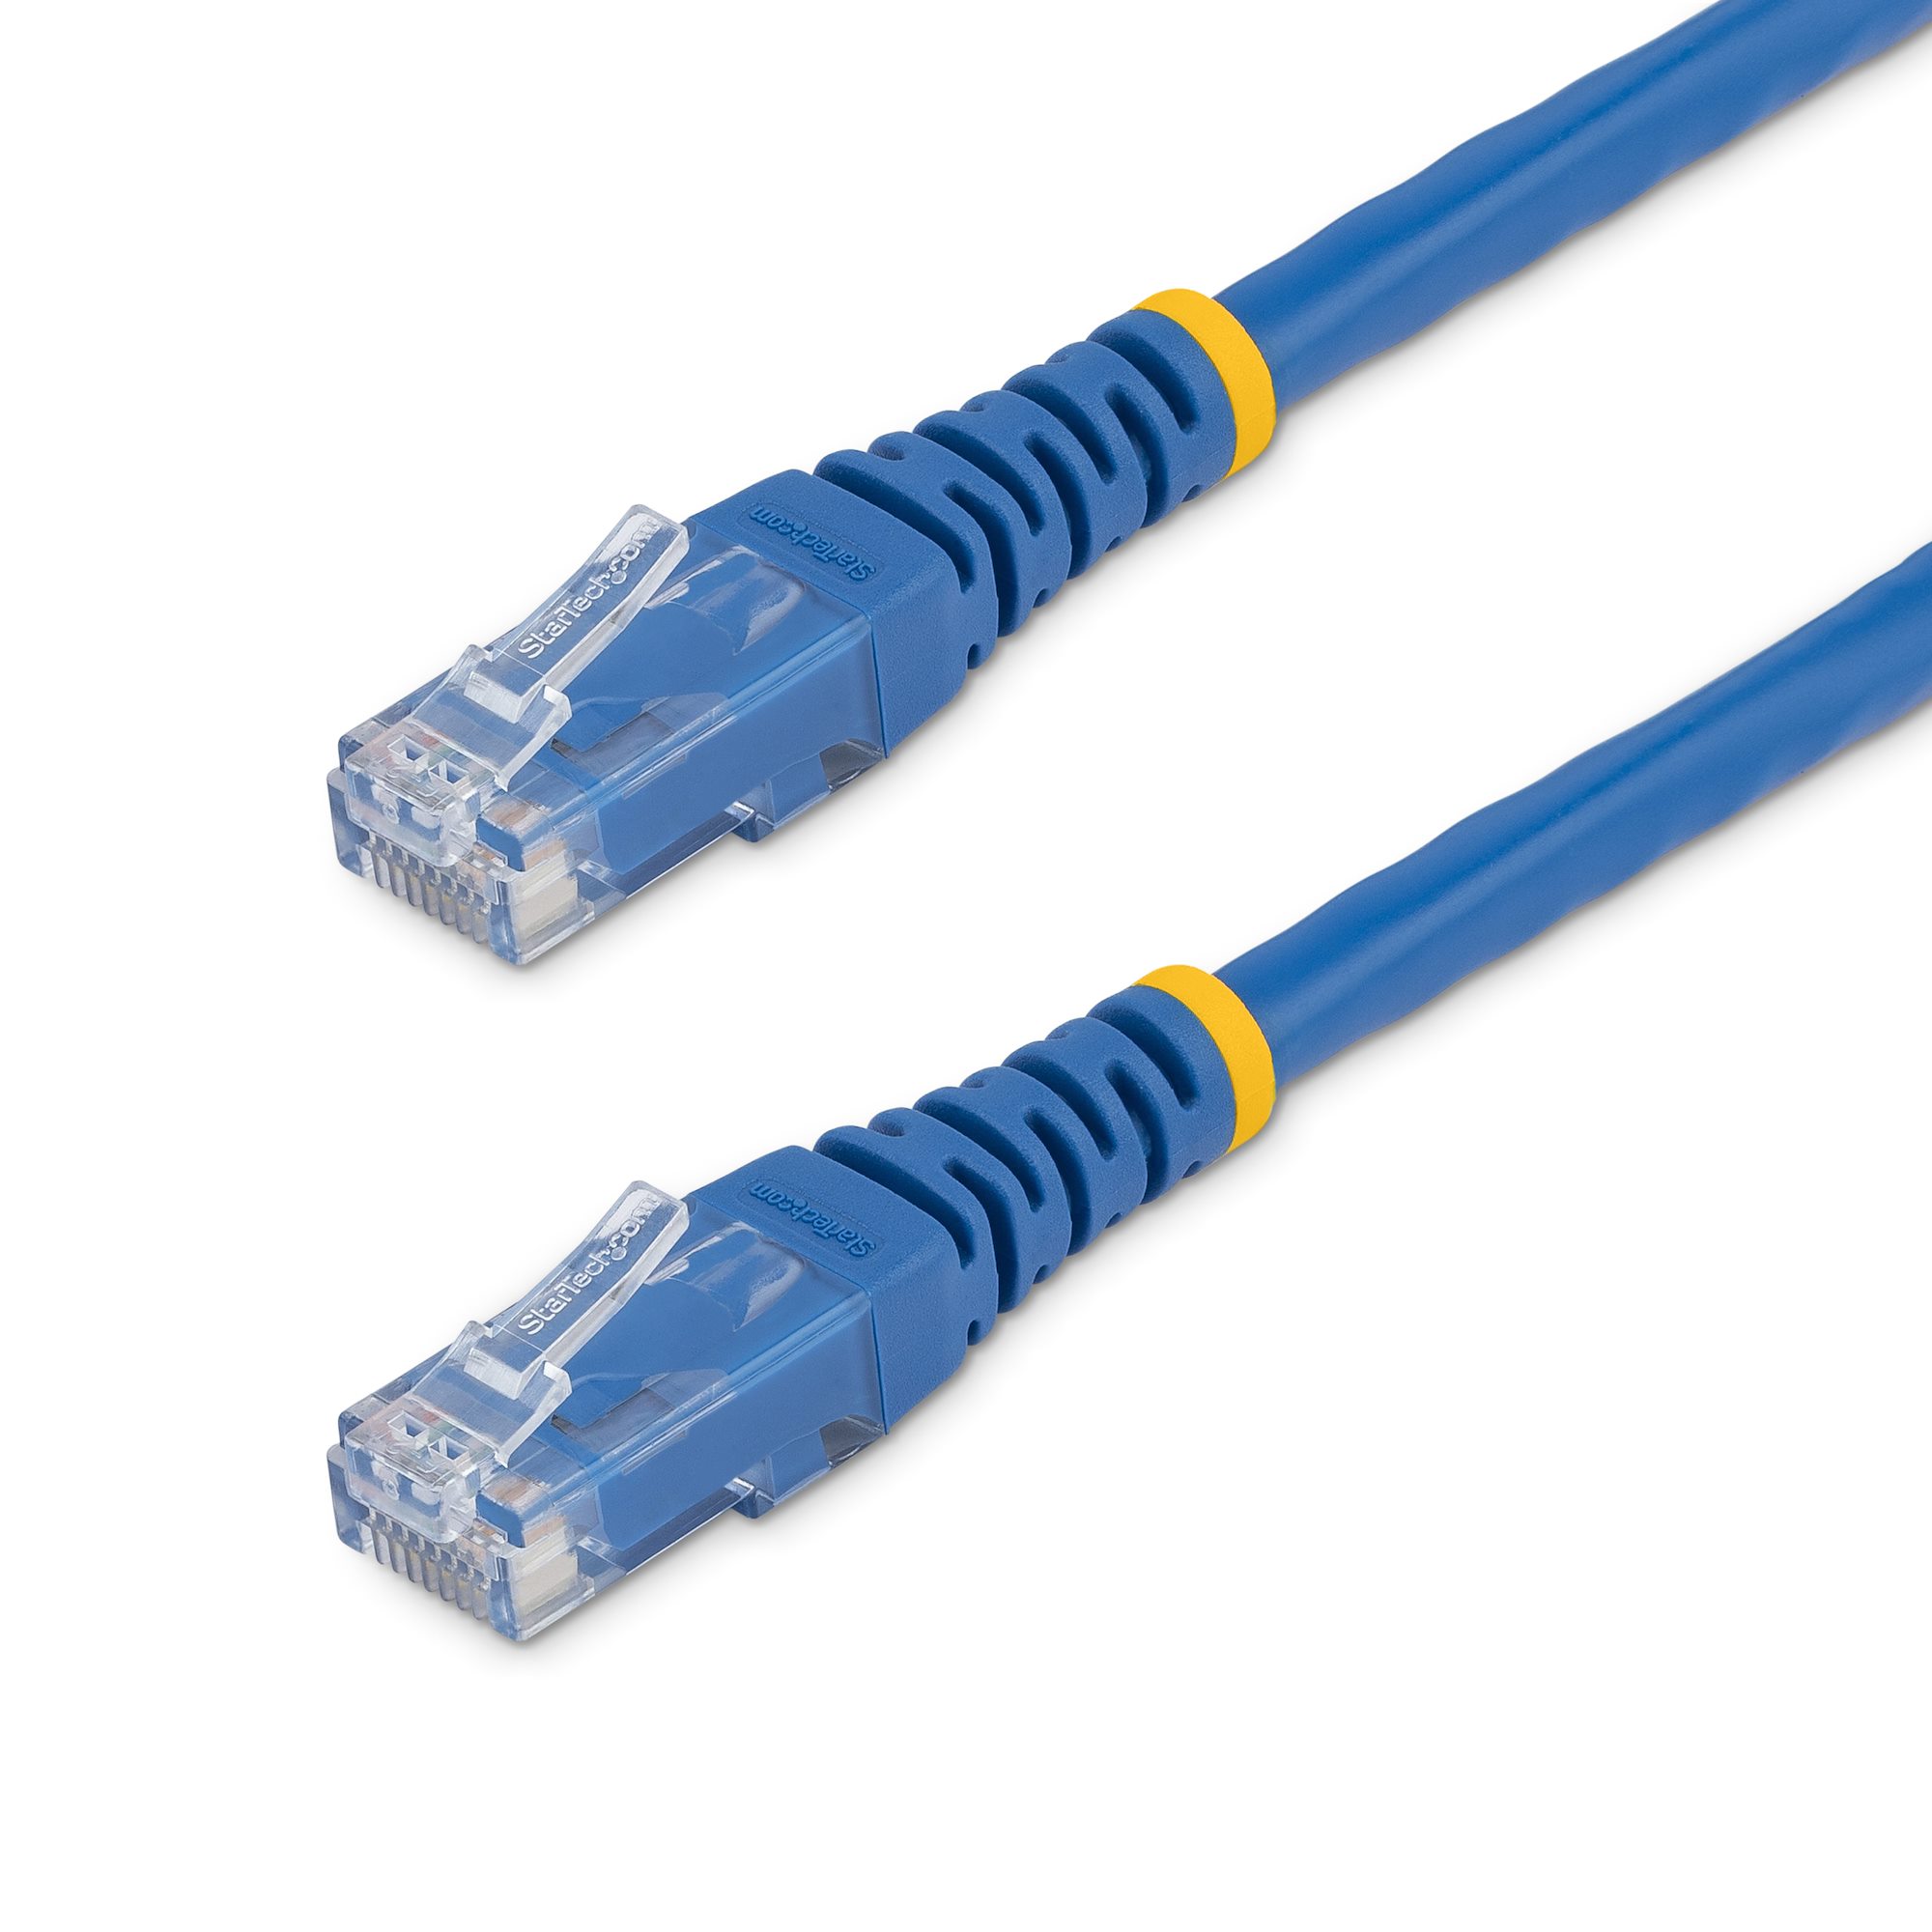 3 ft. CAT6 Ethernet cable - 10 Pack - ETL Verified - Blue CAT6 Patch Cord -  Molded RJ45 Connectors - 24 AWG Copper Wire – UTP Cable